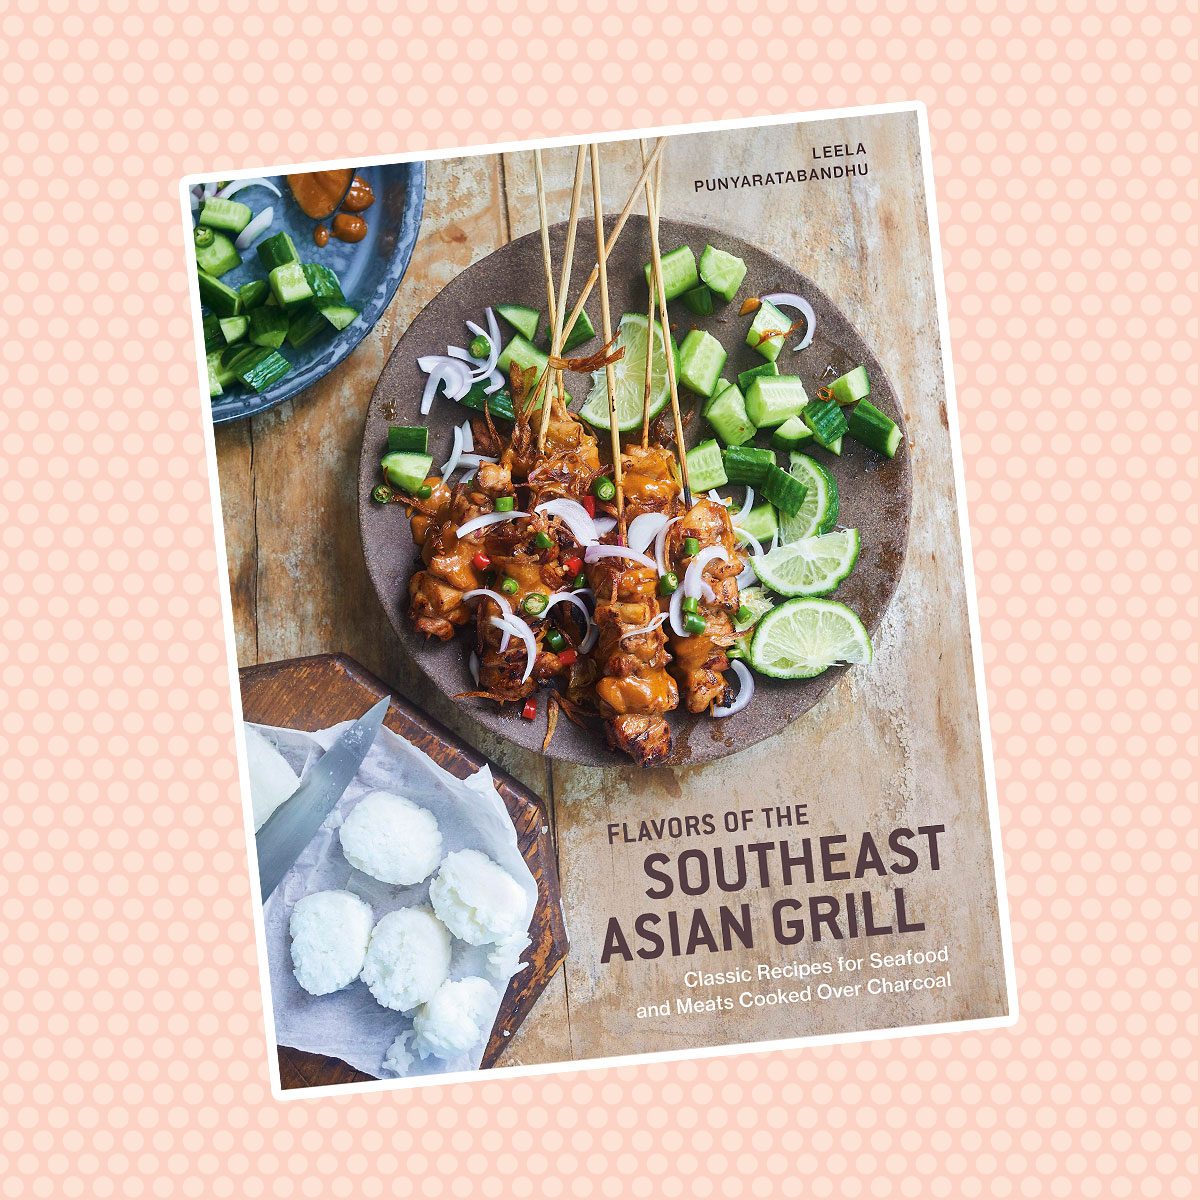 Flavors of the Southeast Asian Grill: Classic Recipes for Seafood and Meats Cooked Over Charcoal